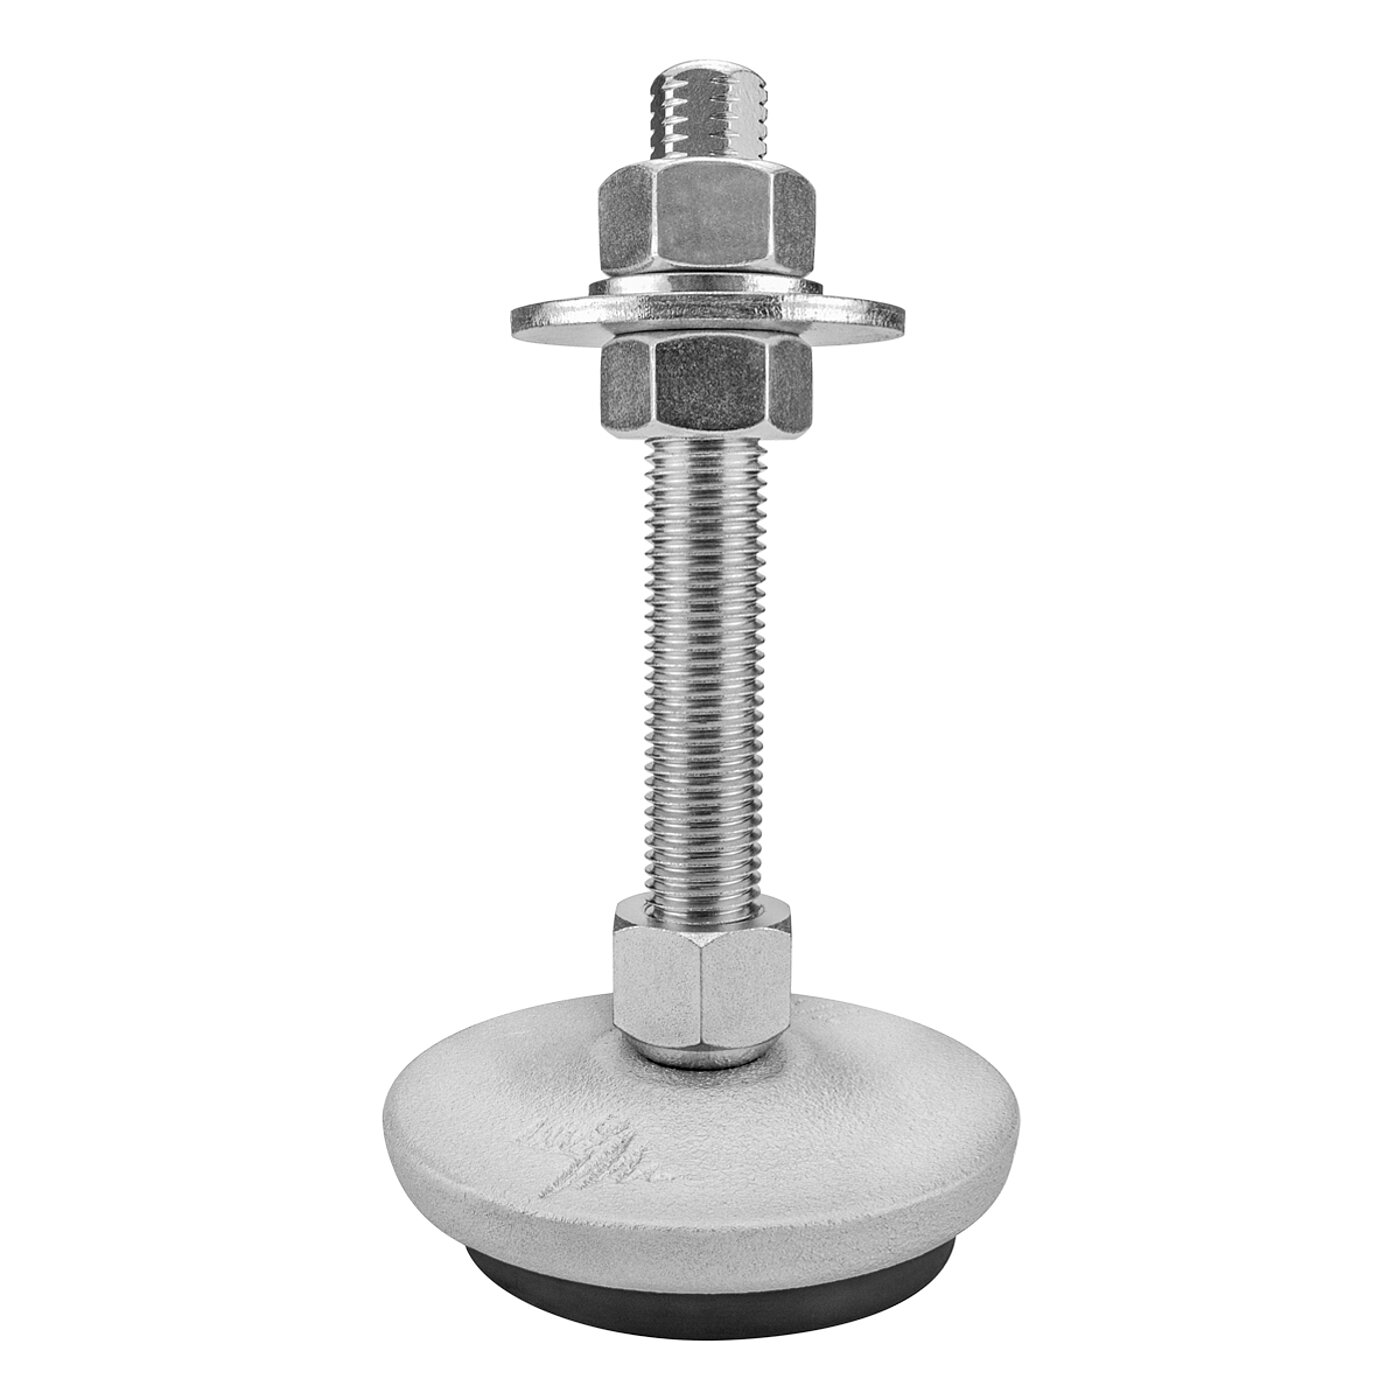 a round, silver-lacquered levelling element made of cast iron, with a pendulum-action zinc-coated levelling screw with a hexagonal spanner flat at the top end, placed in a hexagonal cap nut sitting on top of the cast iron corpus, with the corpus and cap nut tightly connected to each other against falling apart, and black elastomer for vibration damping at the bottom, isolated on white background